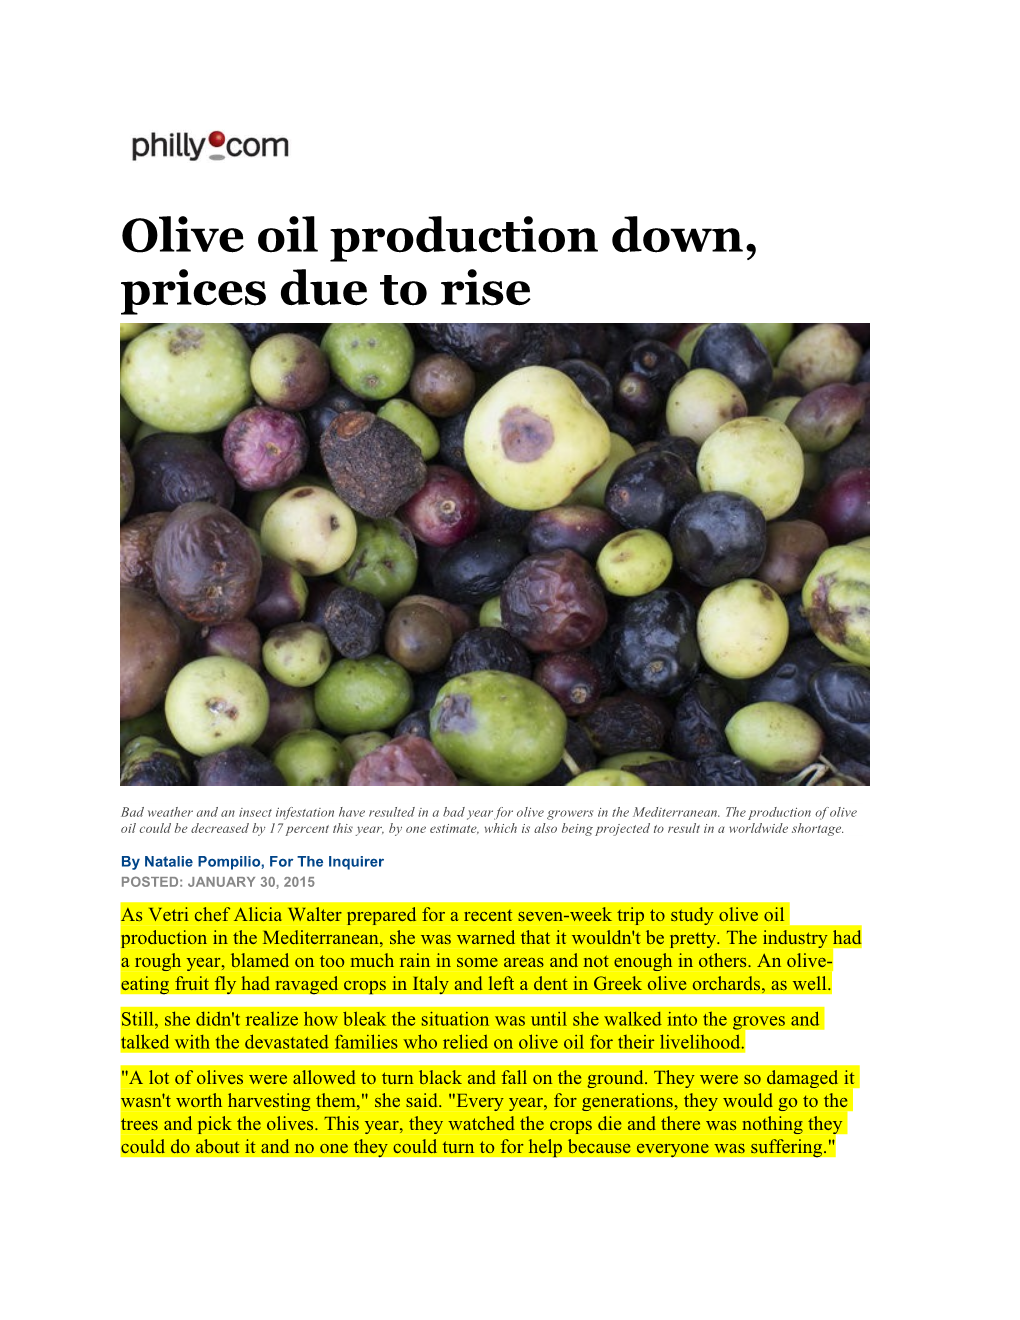 Olive Oil Production Down, Prices Due to Rise